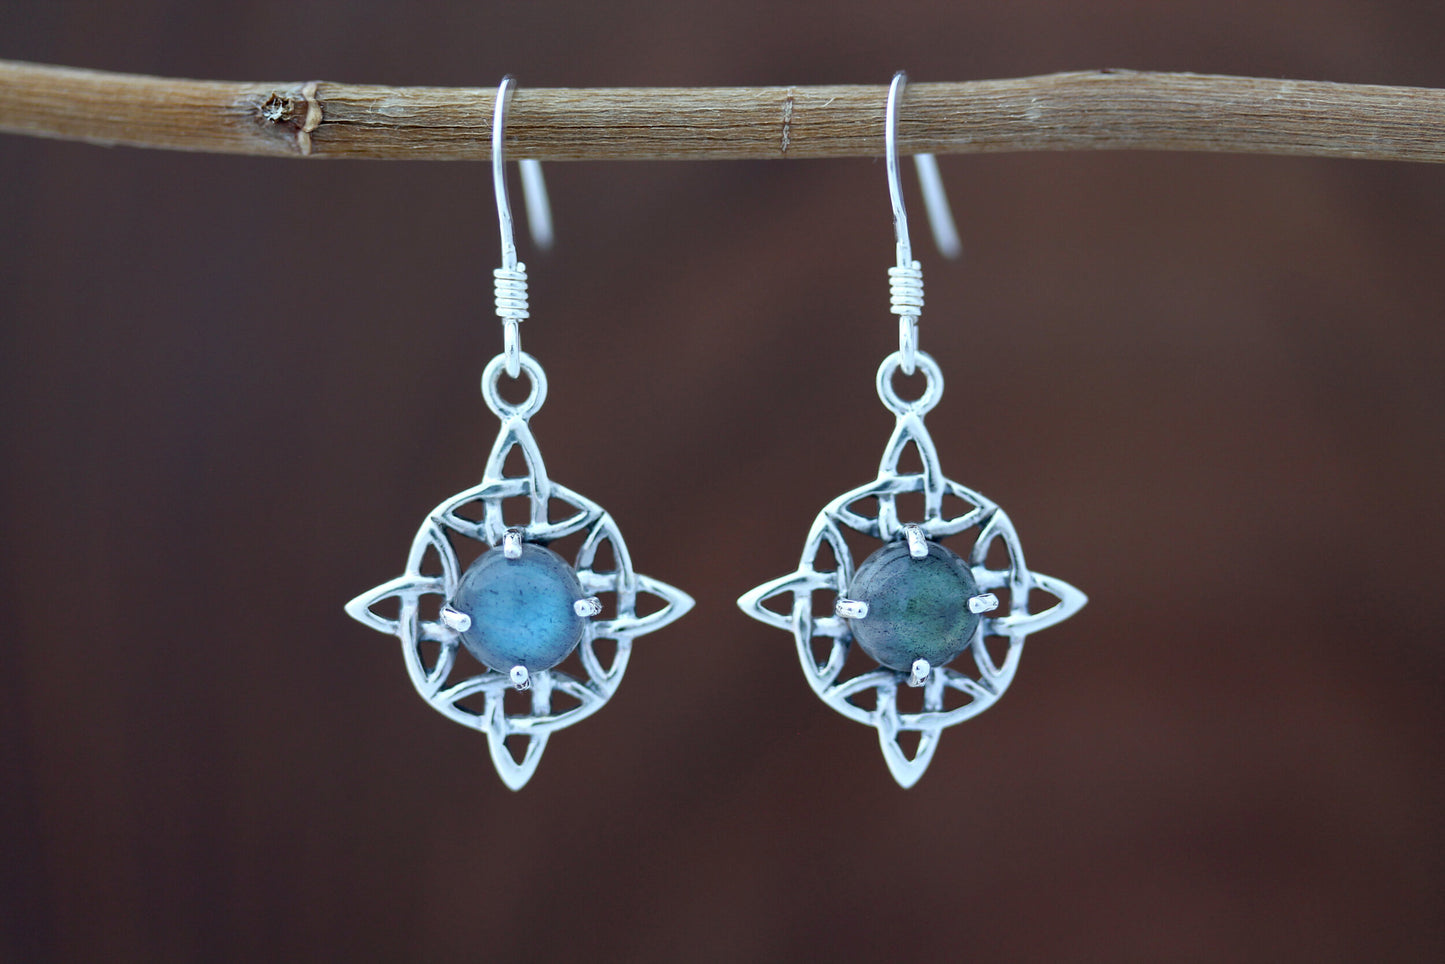 Celtic Knot Earrings - Dara Knot with Labradorite